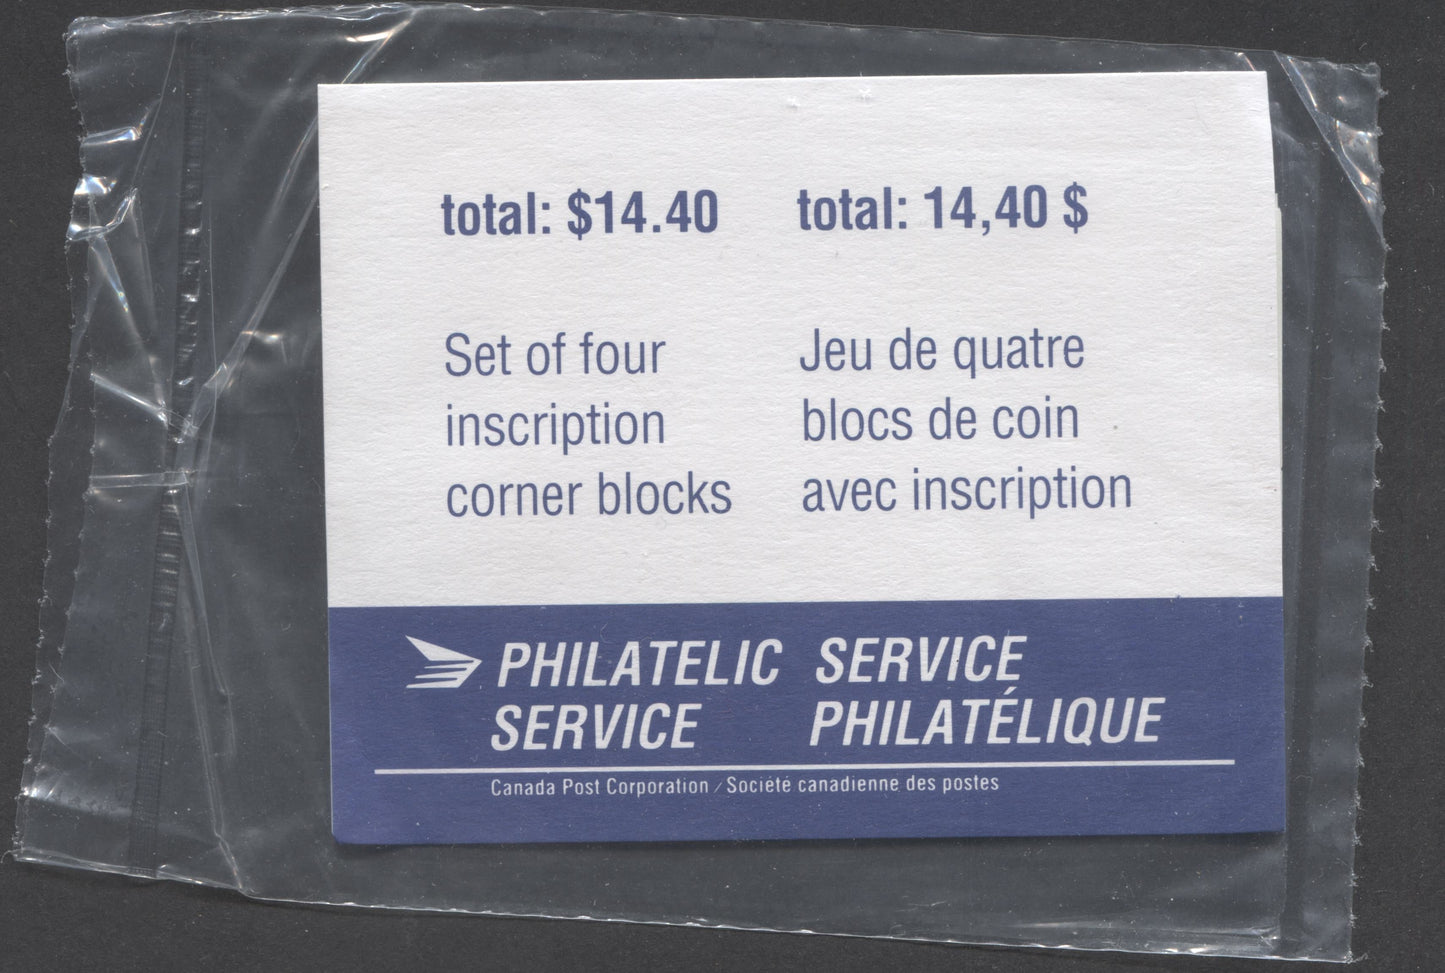 Lot 69 Canada #1374i 90C Multicoloured 1995 International Rate Issue, Canada Post Sealed Pack of Inscription Blocks, Ashton Potter Canada Printing On NF/DF CPP Paper, With HB Type 6A Insert Card, VFNH, Unitrade Cat. $50